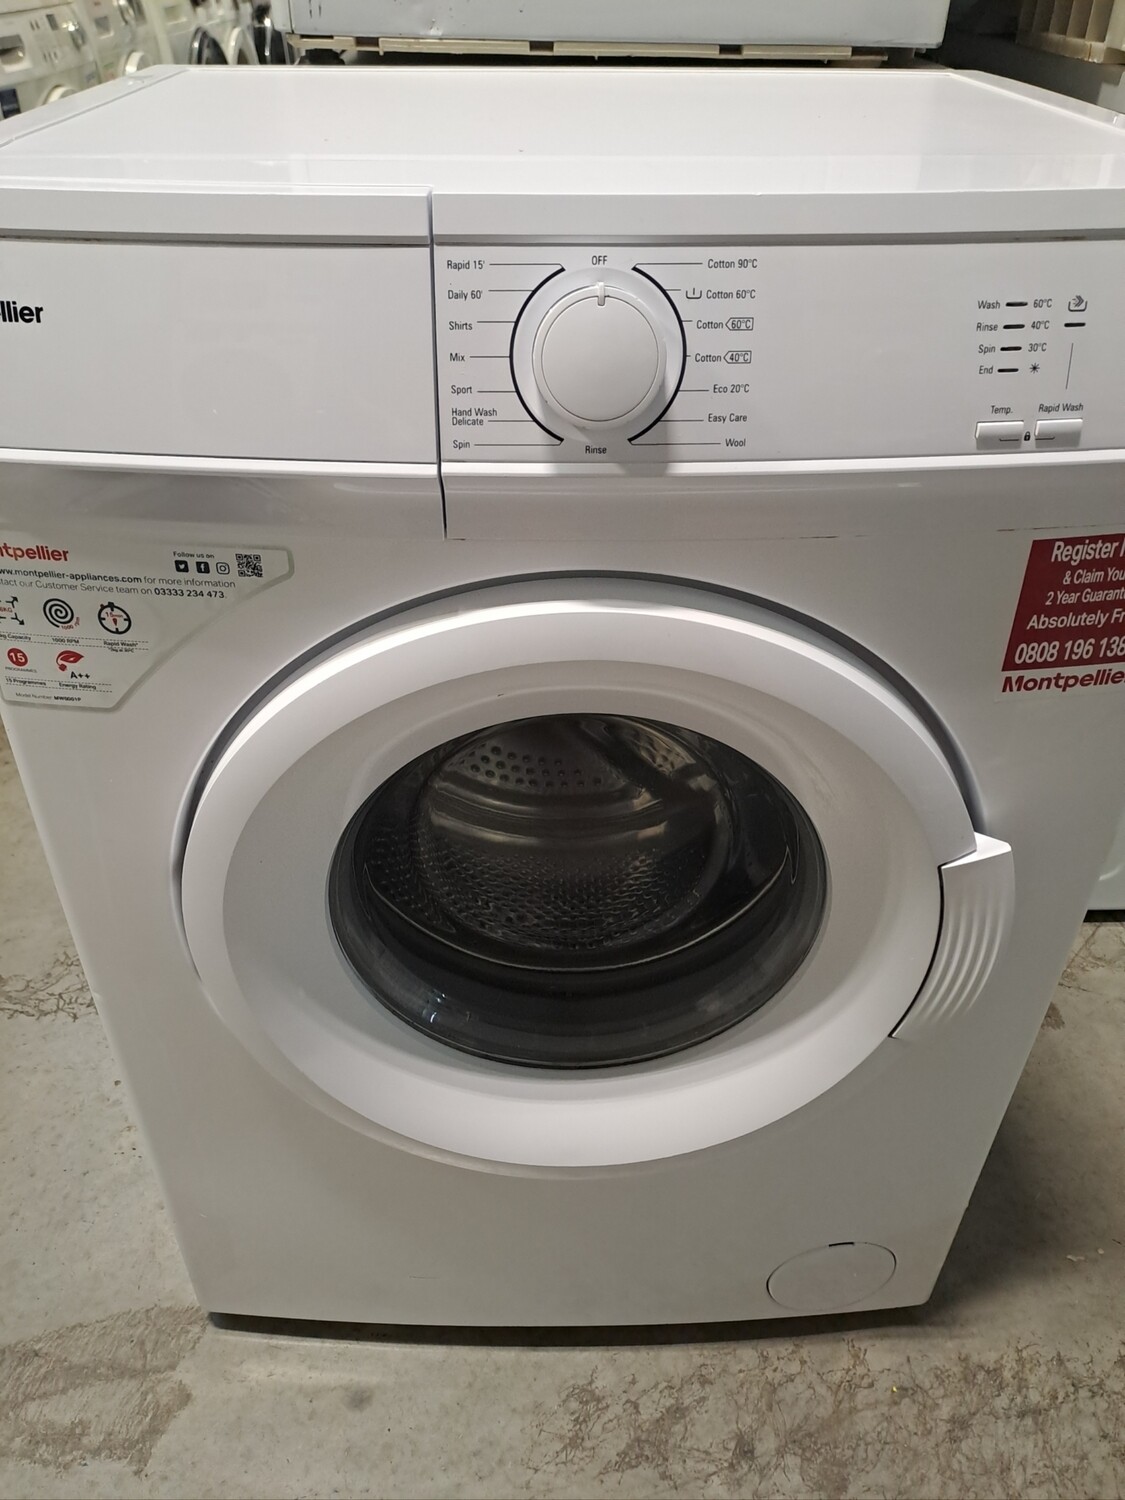 Montpellier MW6001P 6kg Load, 1000 Spin Washing Machine - White - Refurbished - 6 Month Guarantee. This item is located in our Whitby Road Shop 